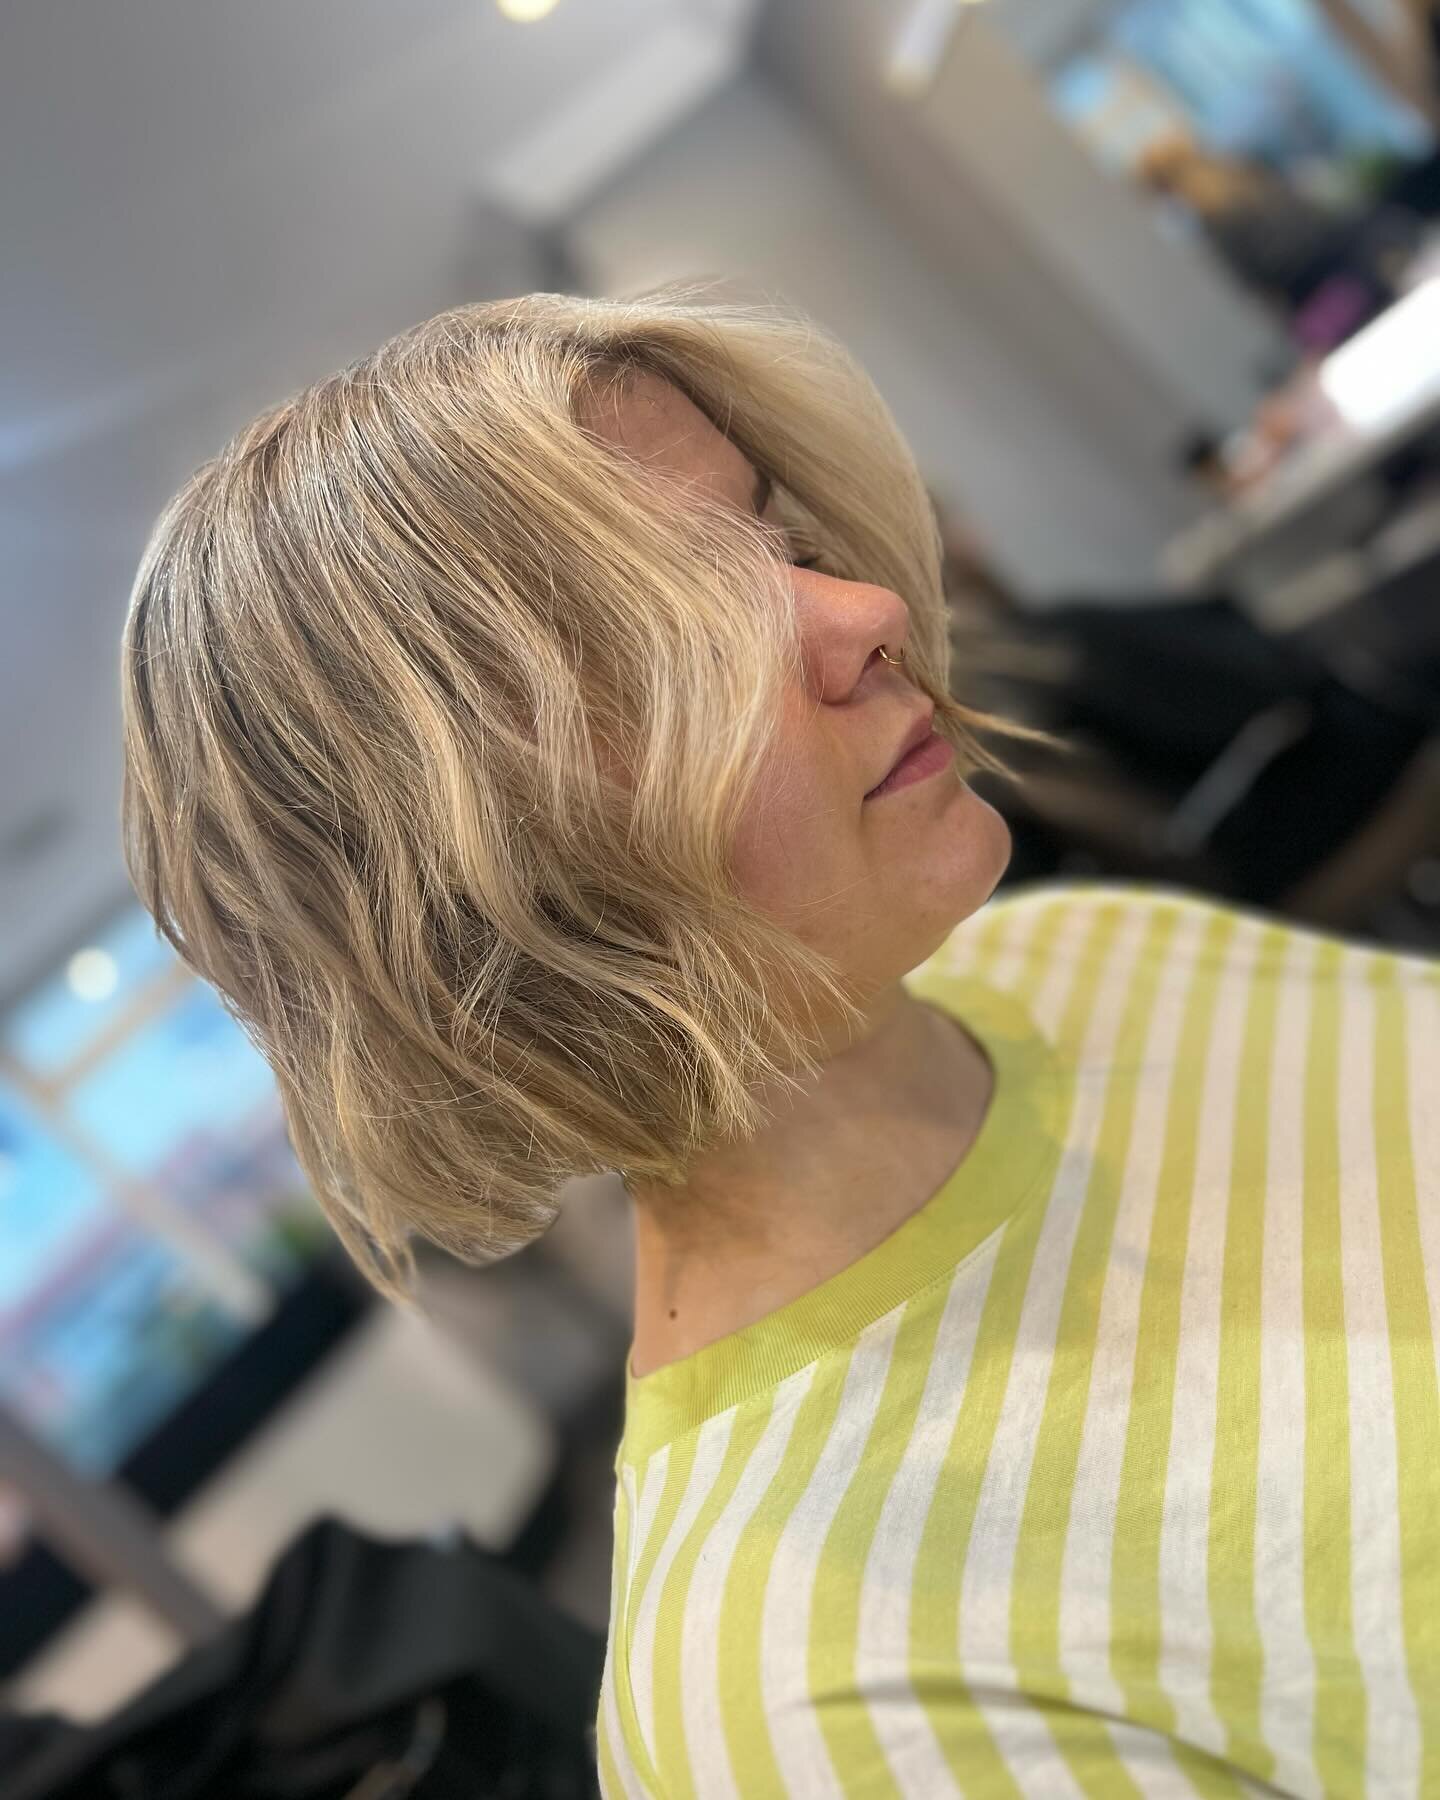 Life is short. Go blonde. 

Hair by tabi ✨

#blonde #blondehair #hair #balayage #hairstyle #love #haircolor #beauty #fashion #haircut #girl #longhair #makeup #model #hairstylist #beautiful #hairstyles #highlights #instagood #blondegirl #behindthechai